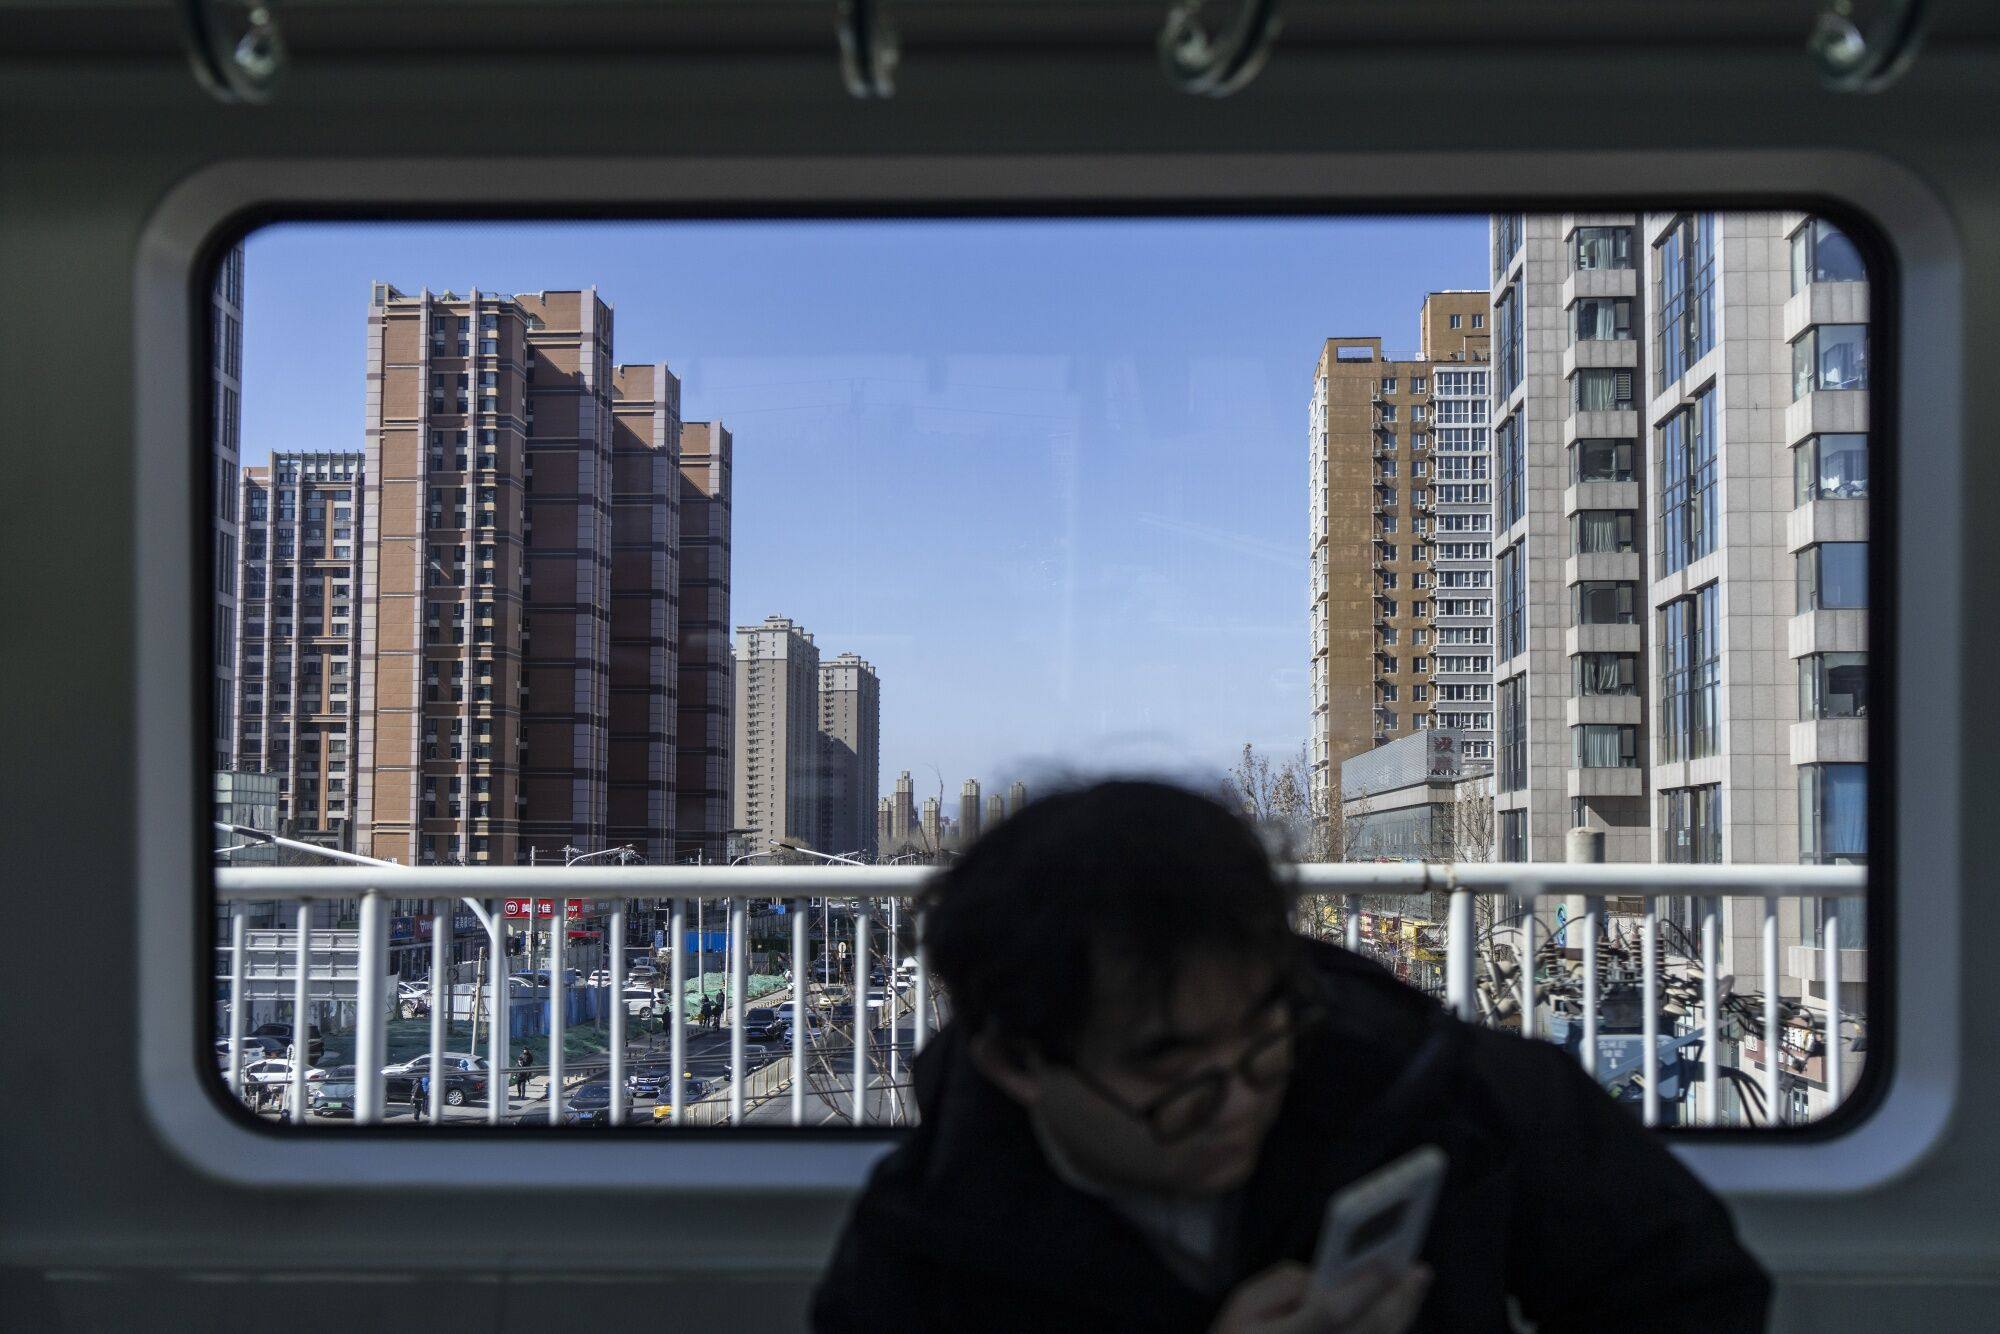 China’s top 100 developers suffered a 60 per cent year-on-year slump in contracted sales to 185.9 billion yuan in February. Photo: Bloomberg